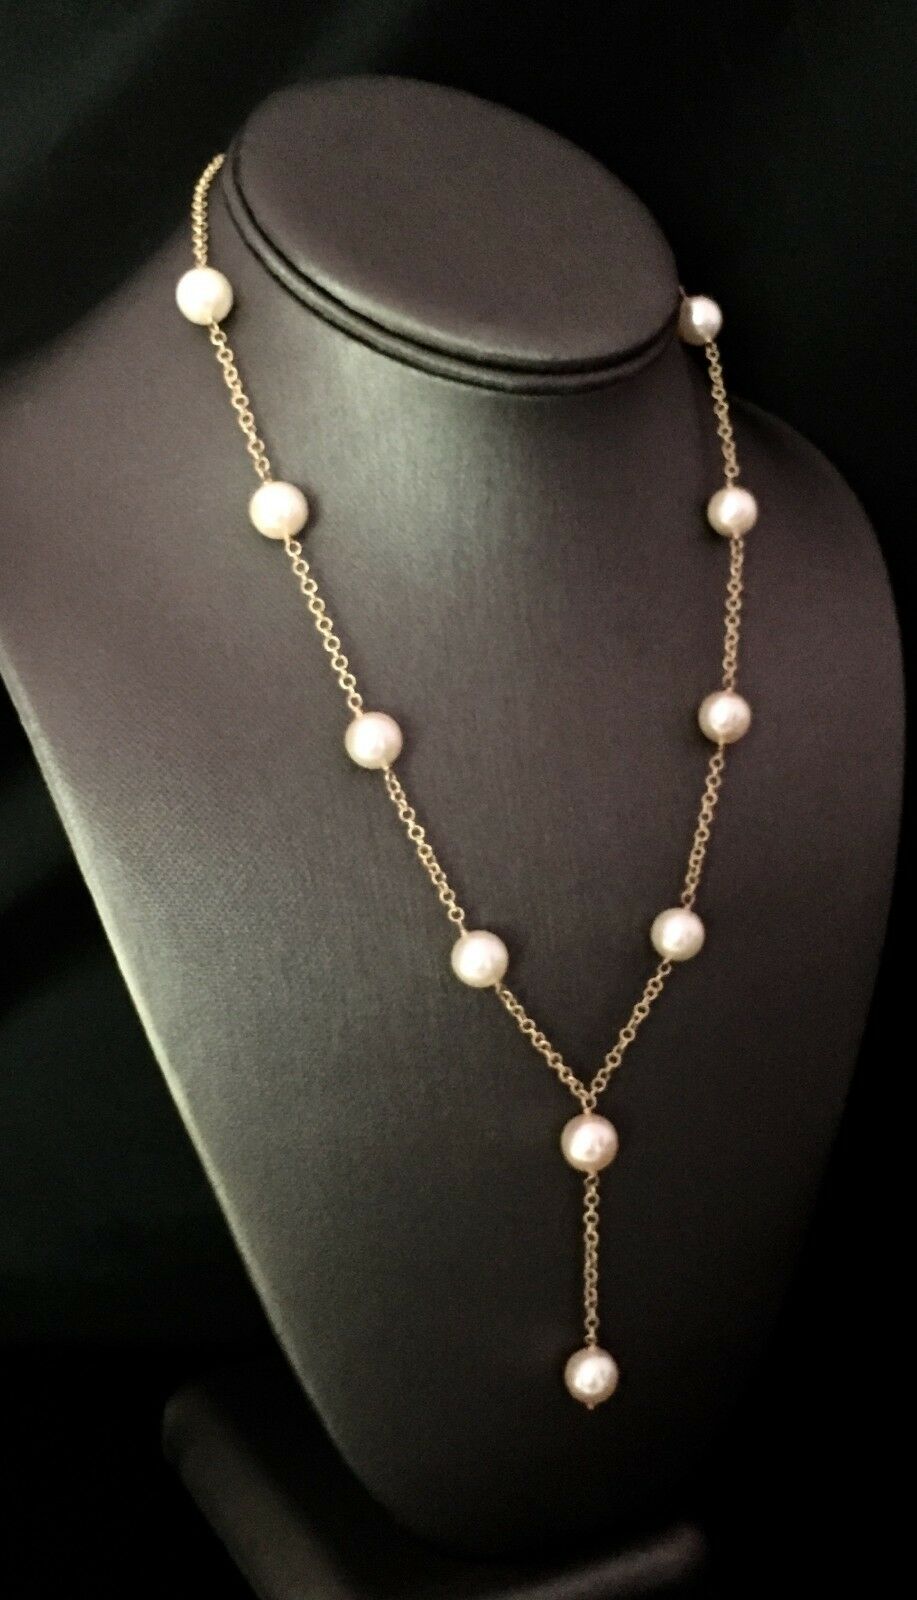 Akoya Pearl Necklace 14k Gold Large 9.5 mm 18.5" Italy Certified $3,950 721475 - Certified Fine Jewelry